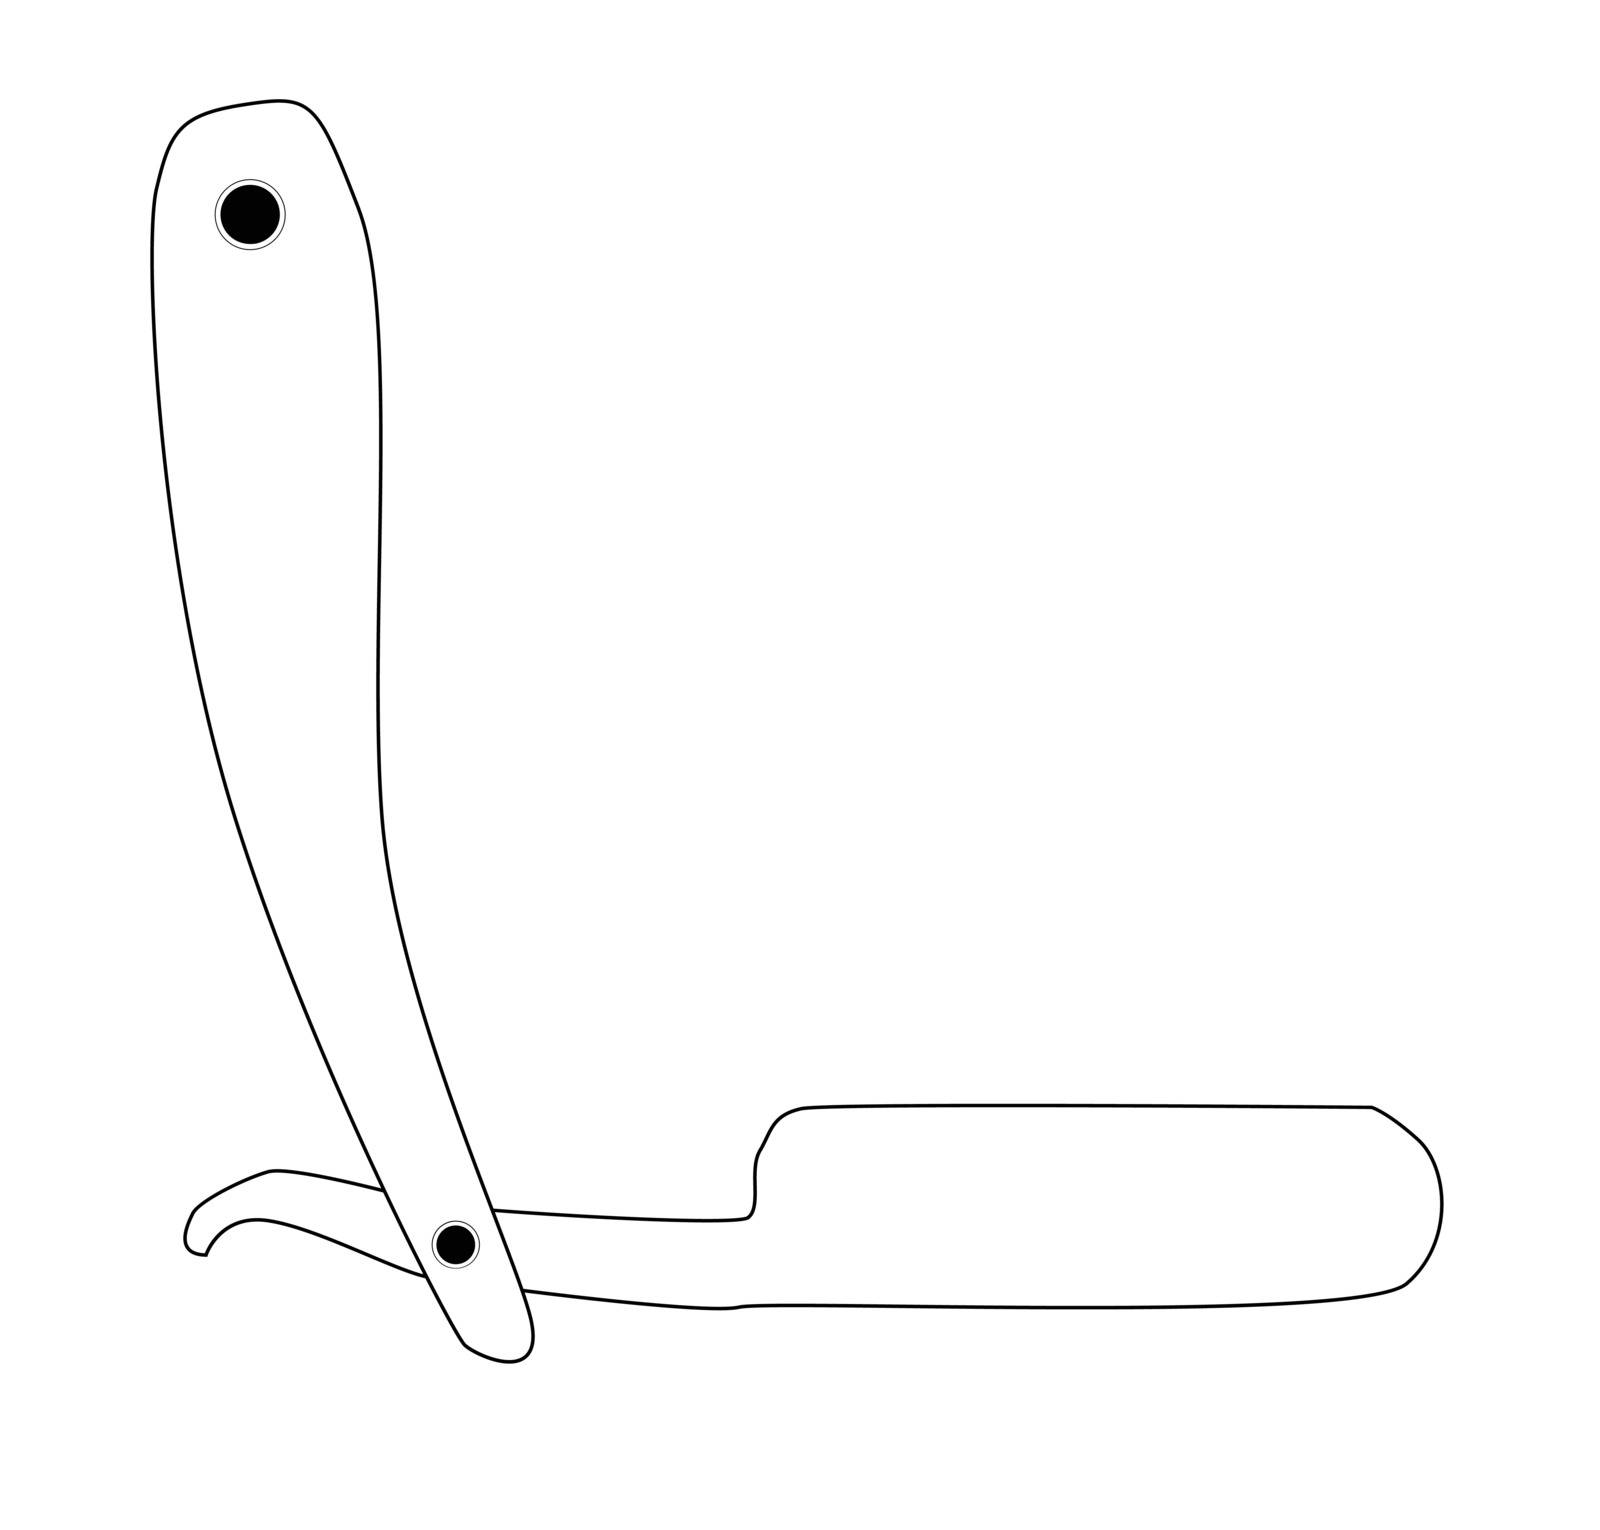 Barbers cut throat razor black outline over a white background